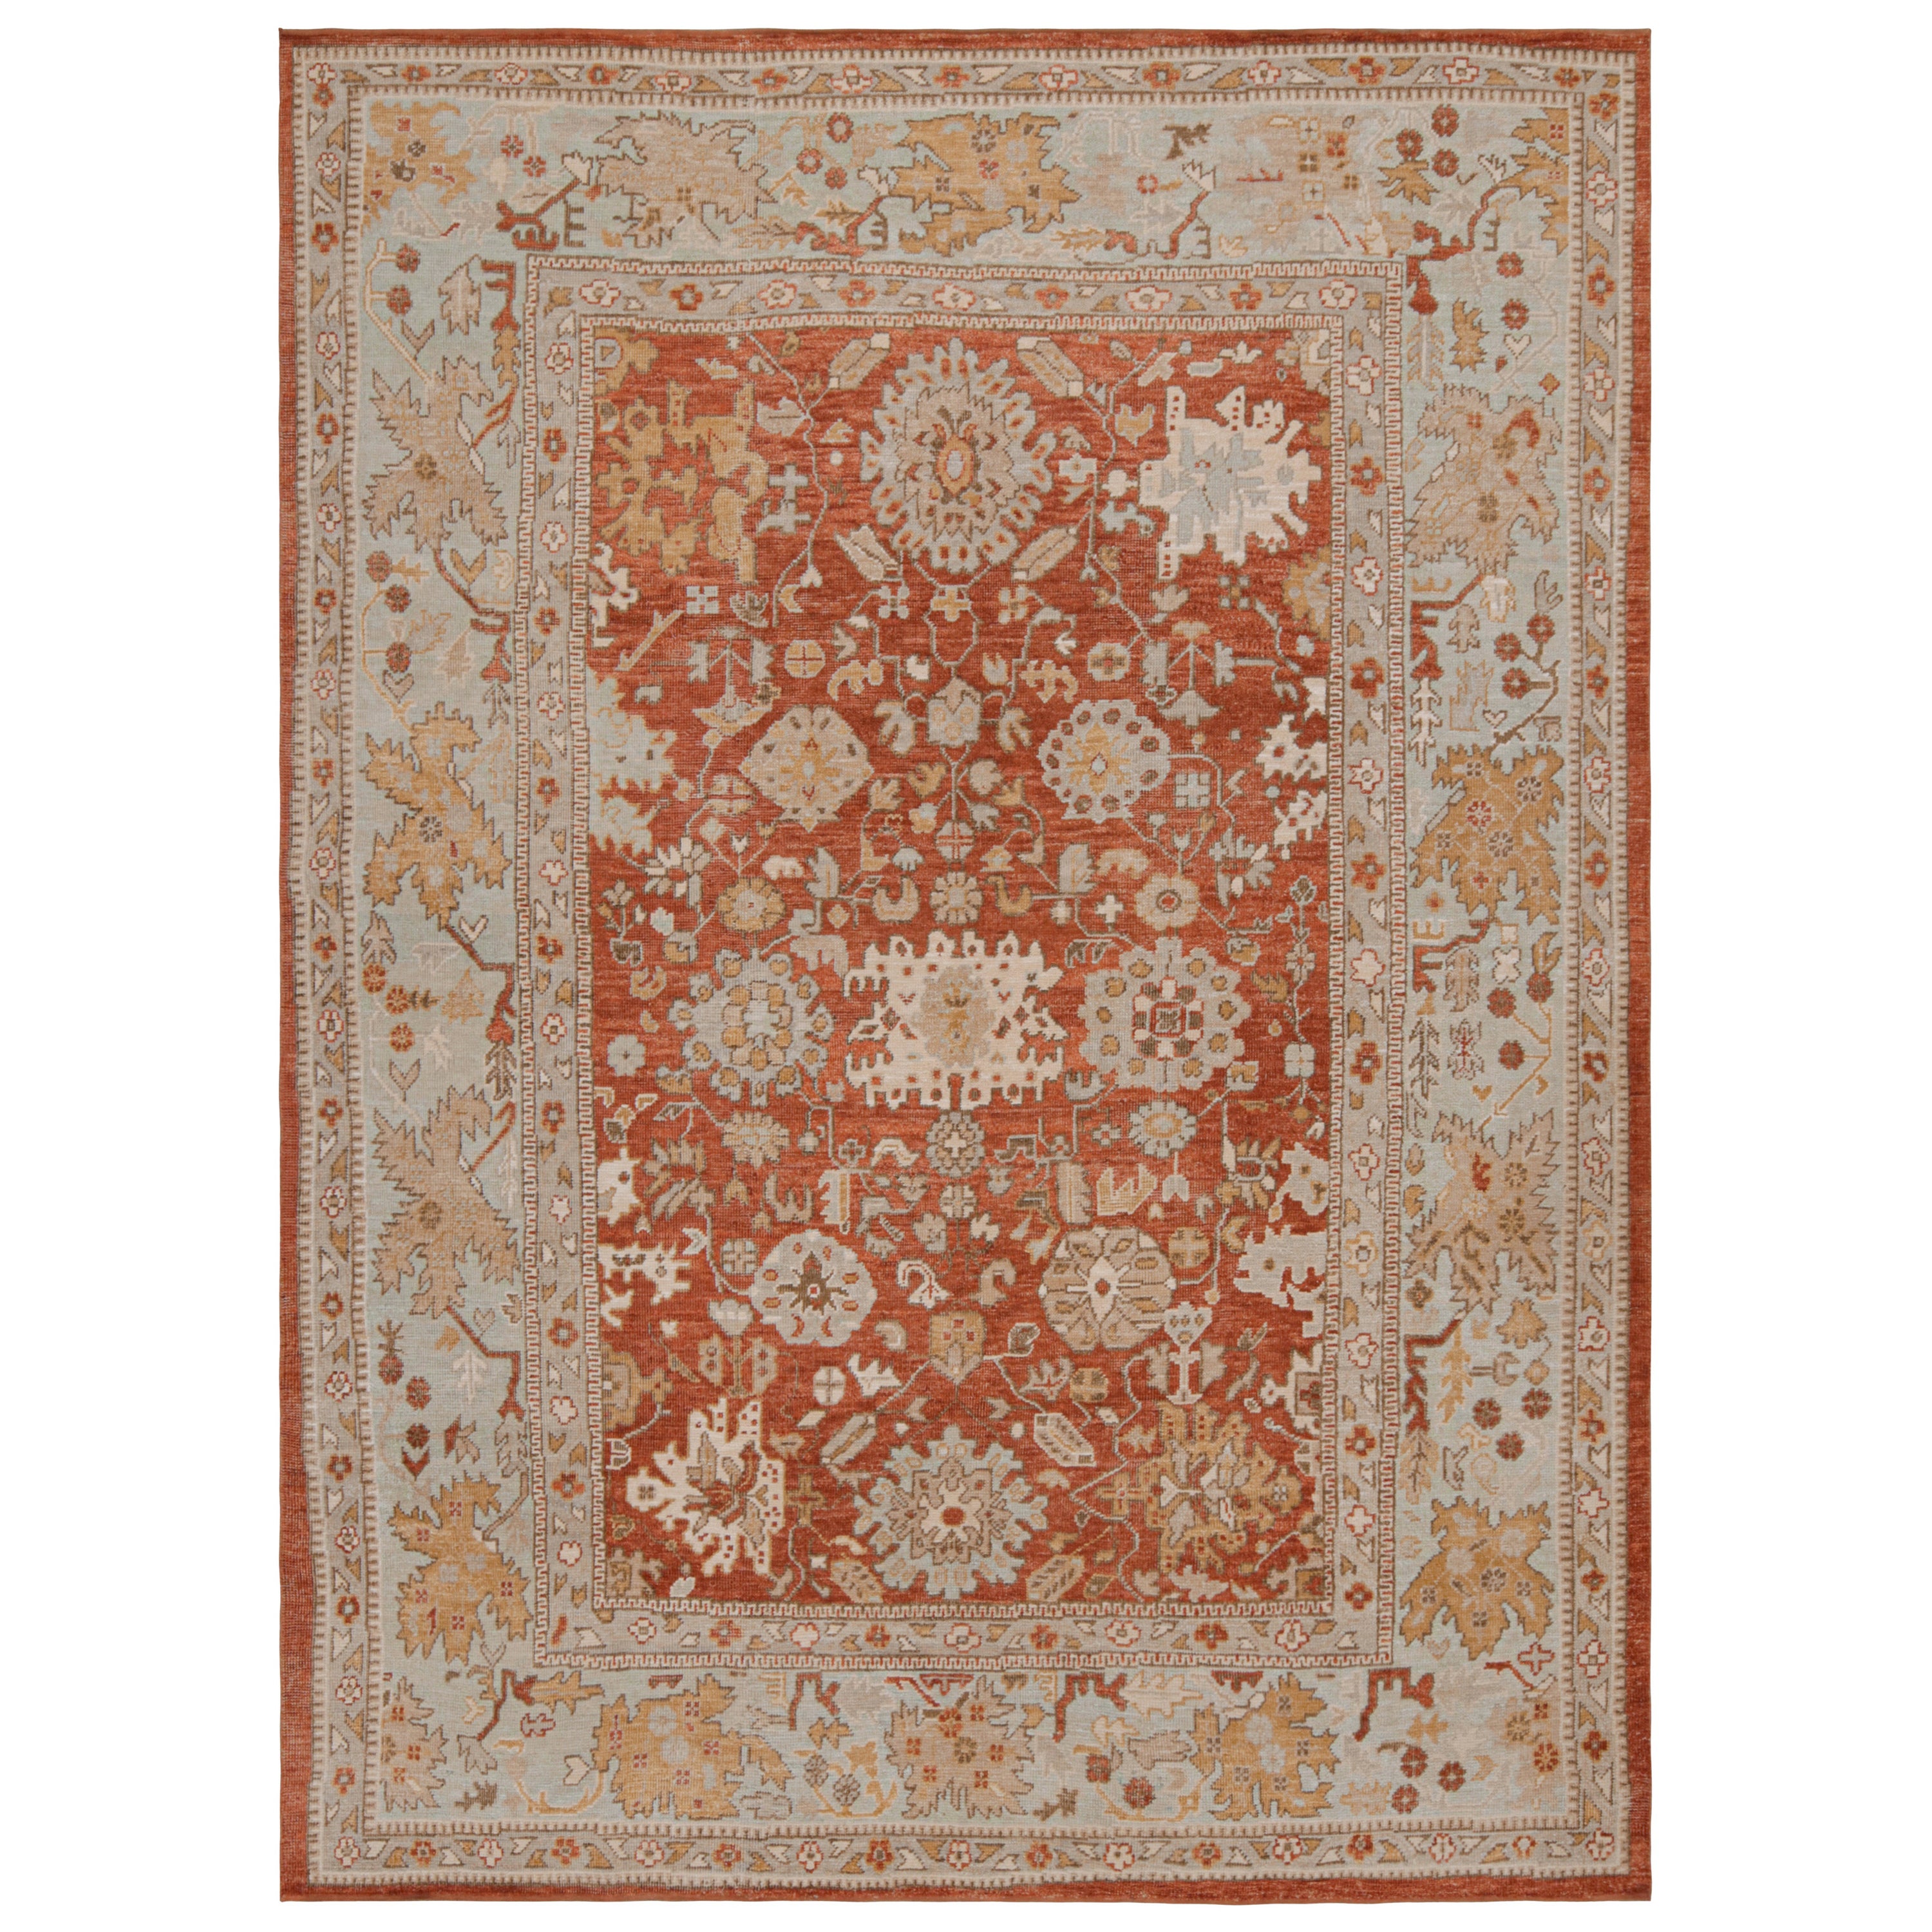 Rug & Kilim’s Oushak style rug in Red, Blue & Brown Floral Patterns For Sale